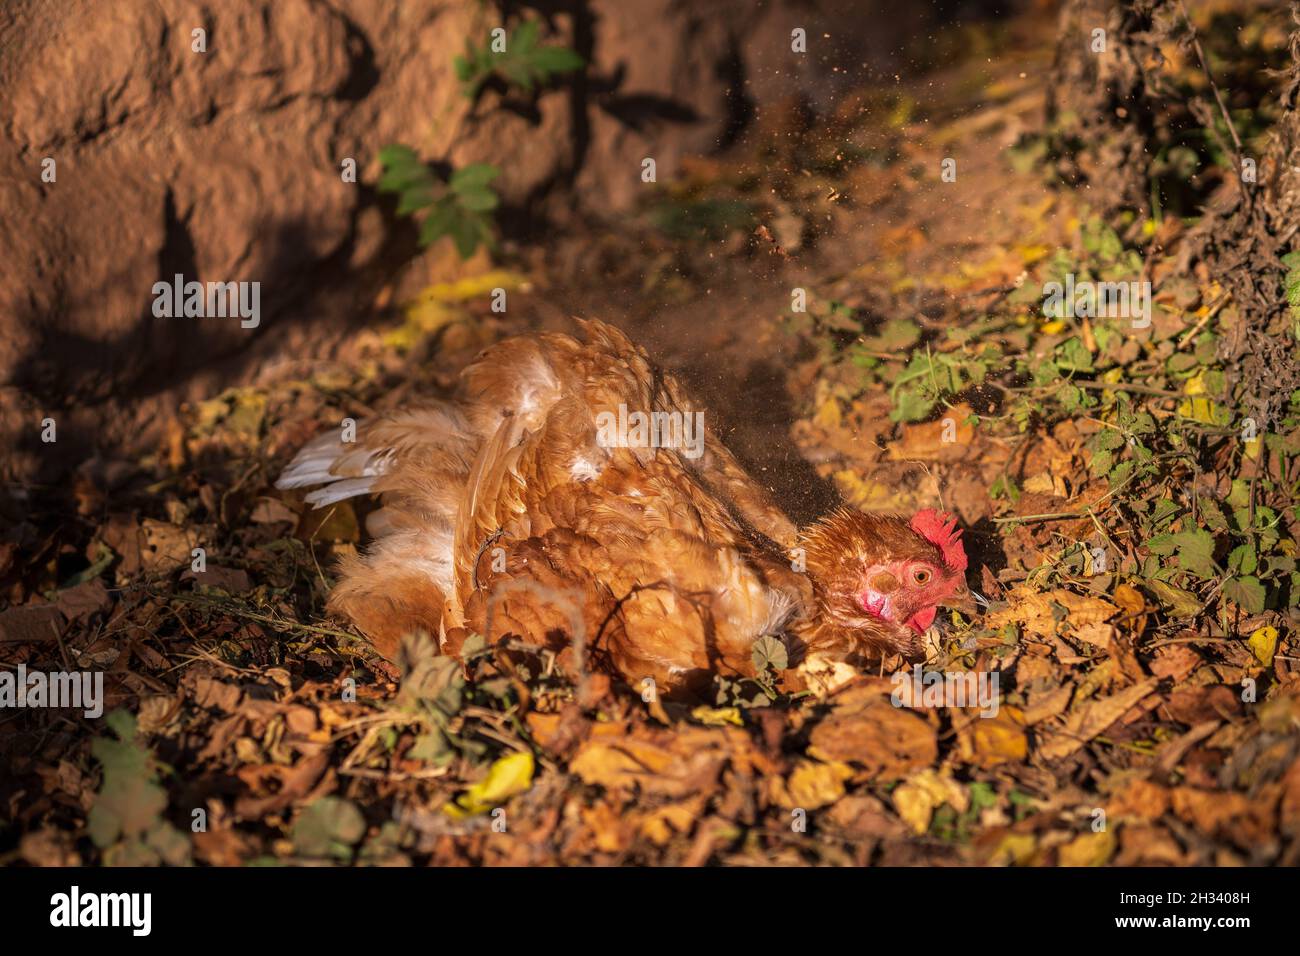 Happy female chicken sunbathing and sand bathing in a free range meadow. Dirt sprays through the air from scratching with its feet. Dust bathing. Stock Photo